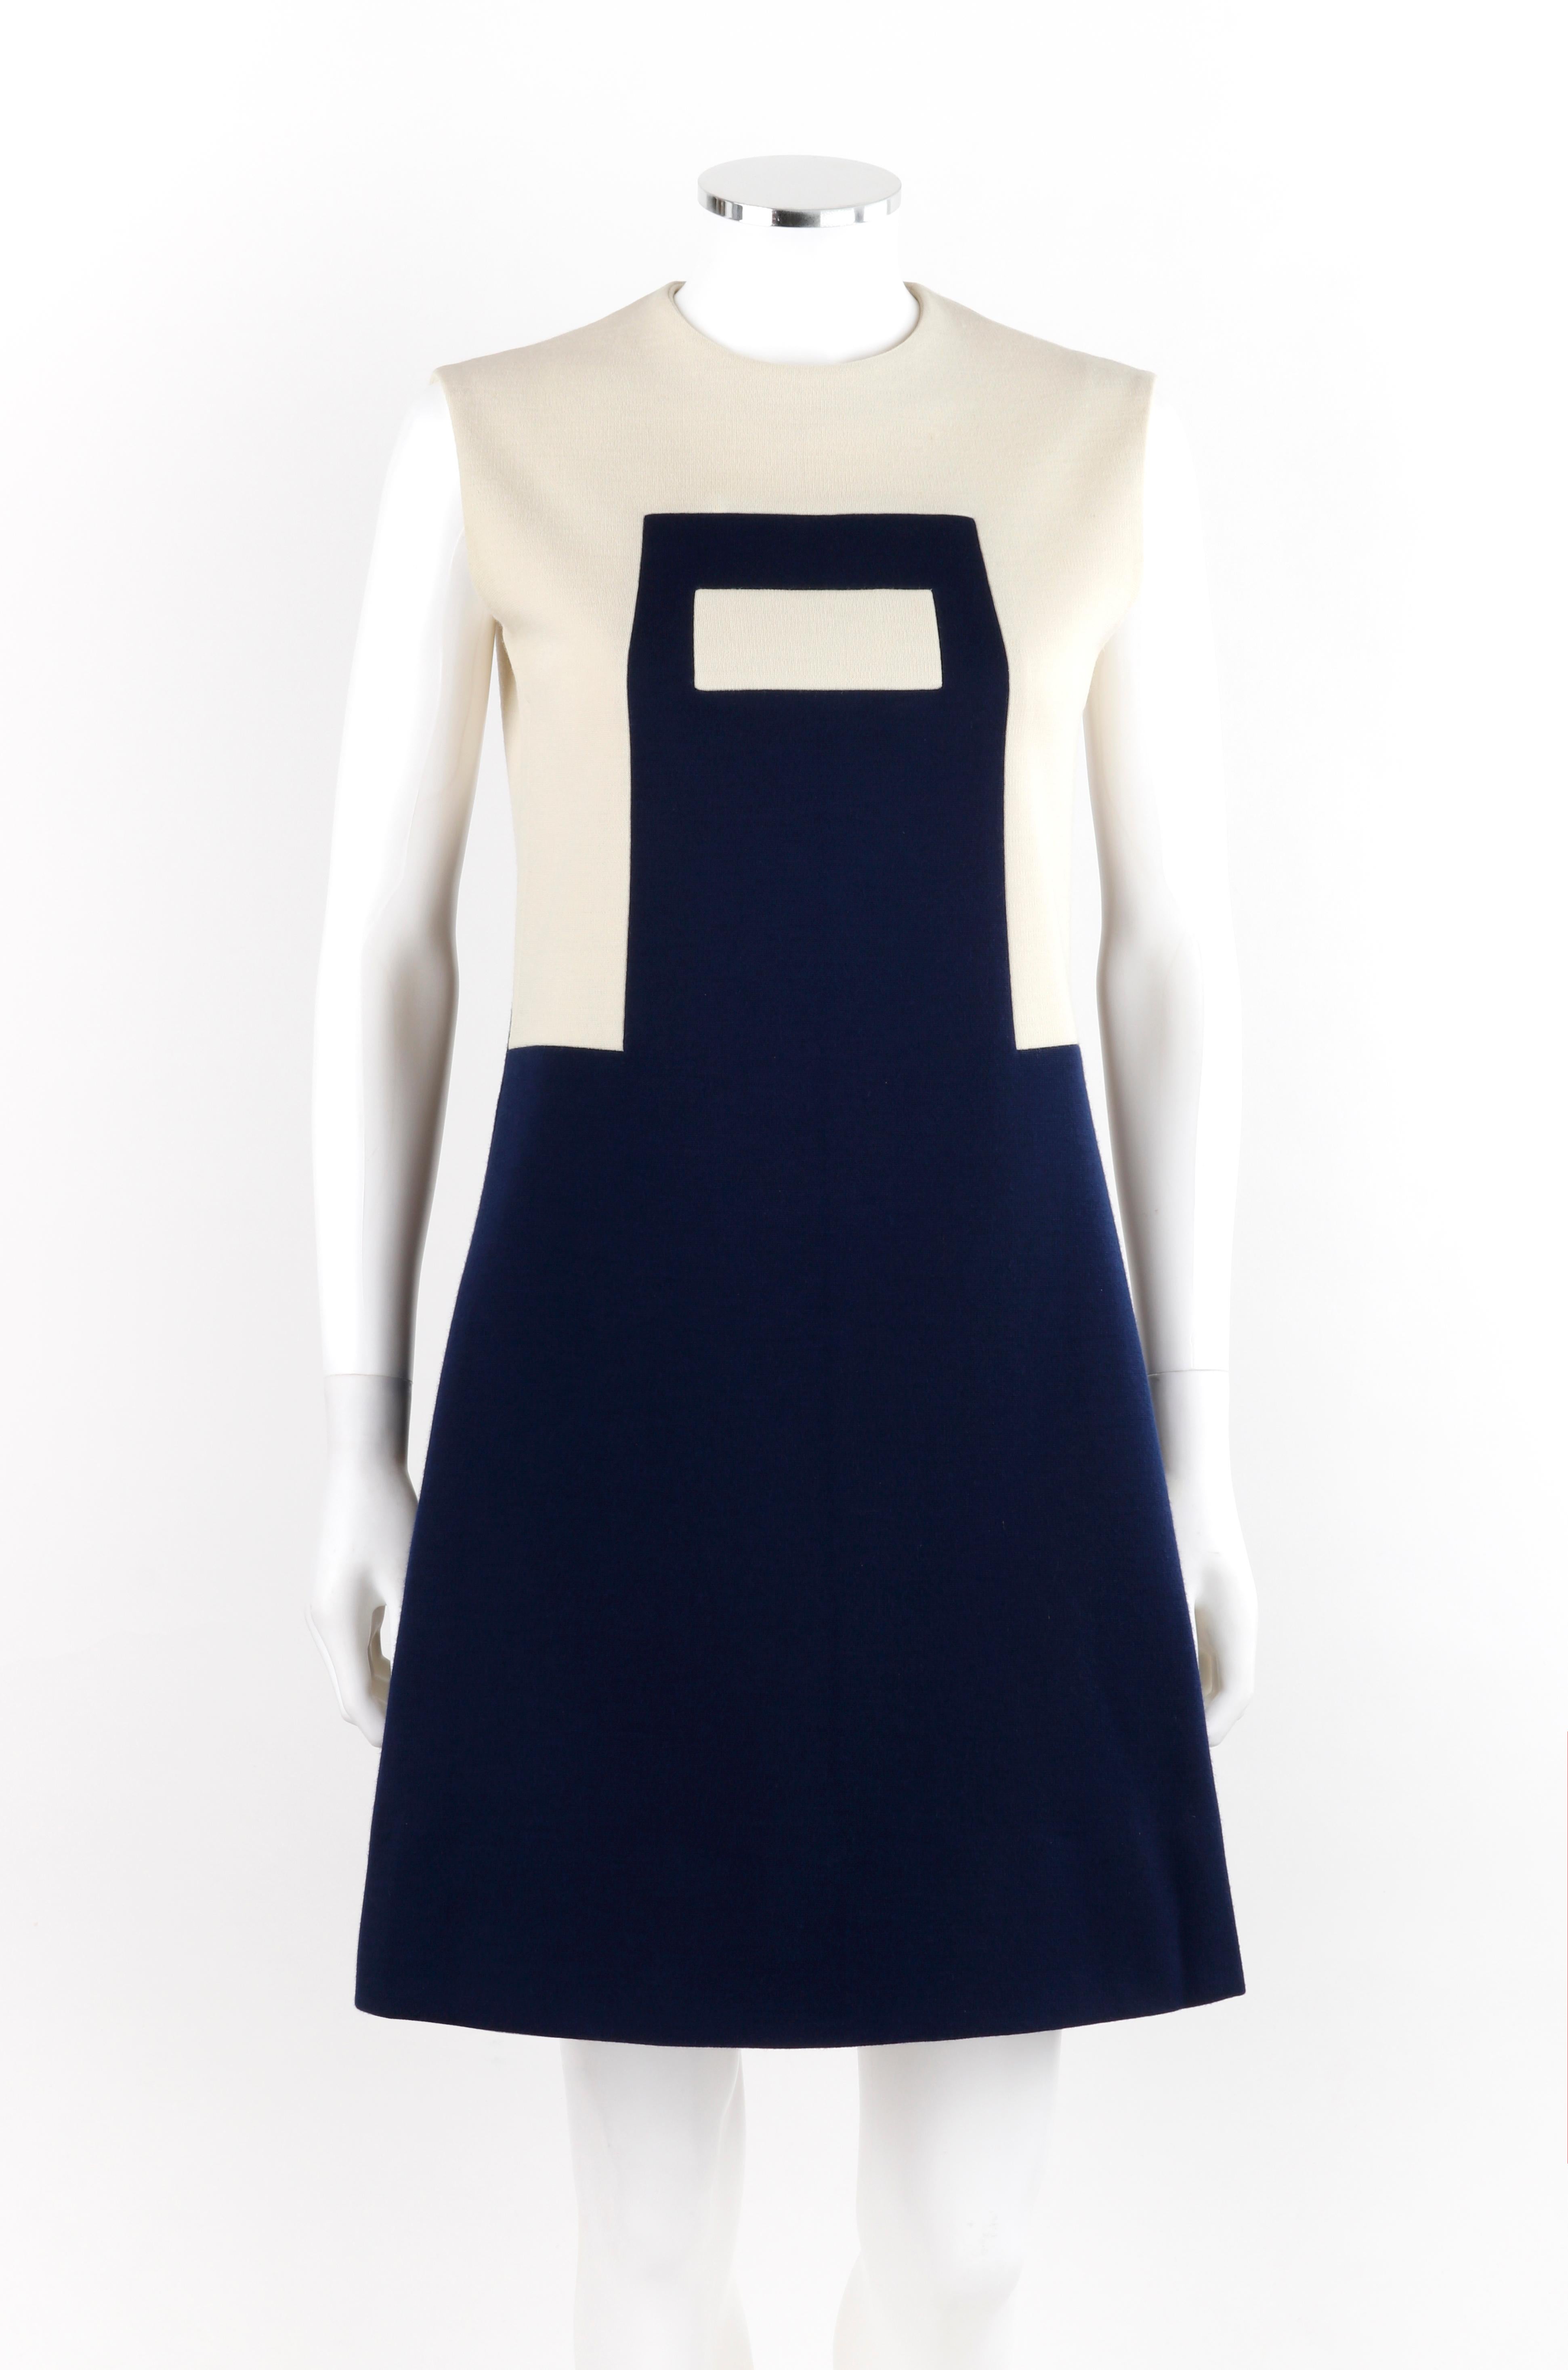 PIERRE CARDIN c.1960’s Navy Cream Geometric Mod Color Block Mini Dress
 
Circa: 1960’s
Label(s): Les Jerseys de Pierre Cardin
Designer: Pierre Cardin
Style: Sleeveless a-line mini dress
Color(s): Shades of navy blue and off white
Lined: Yes
Marked